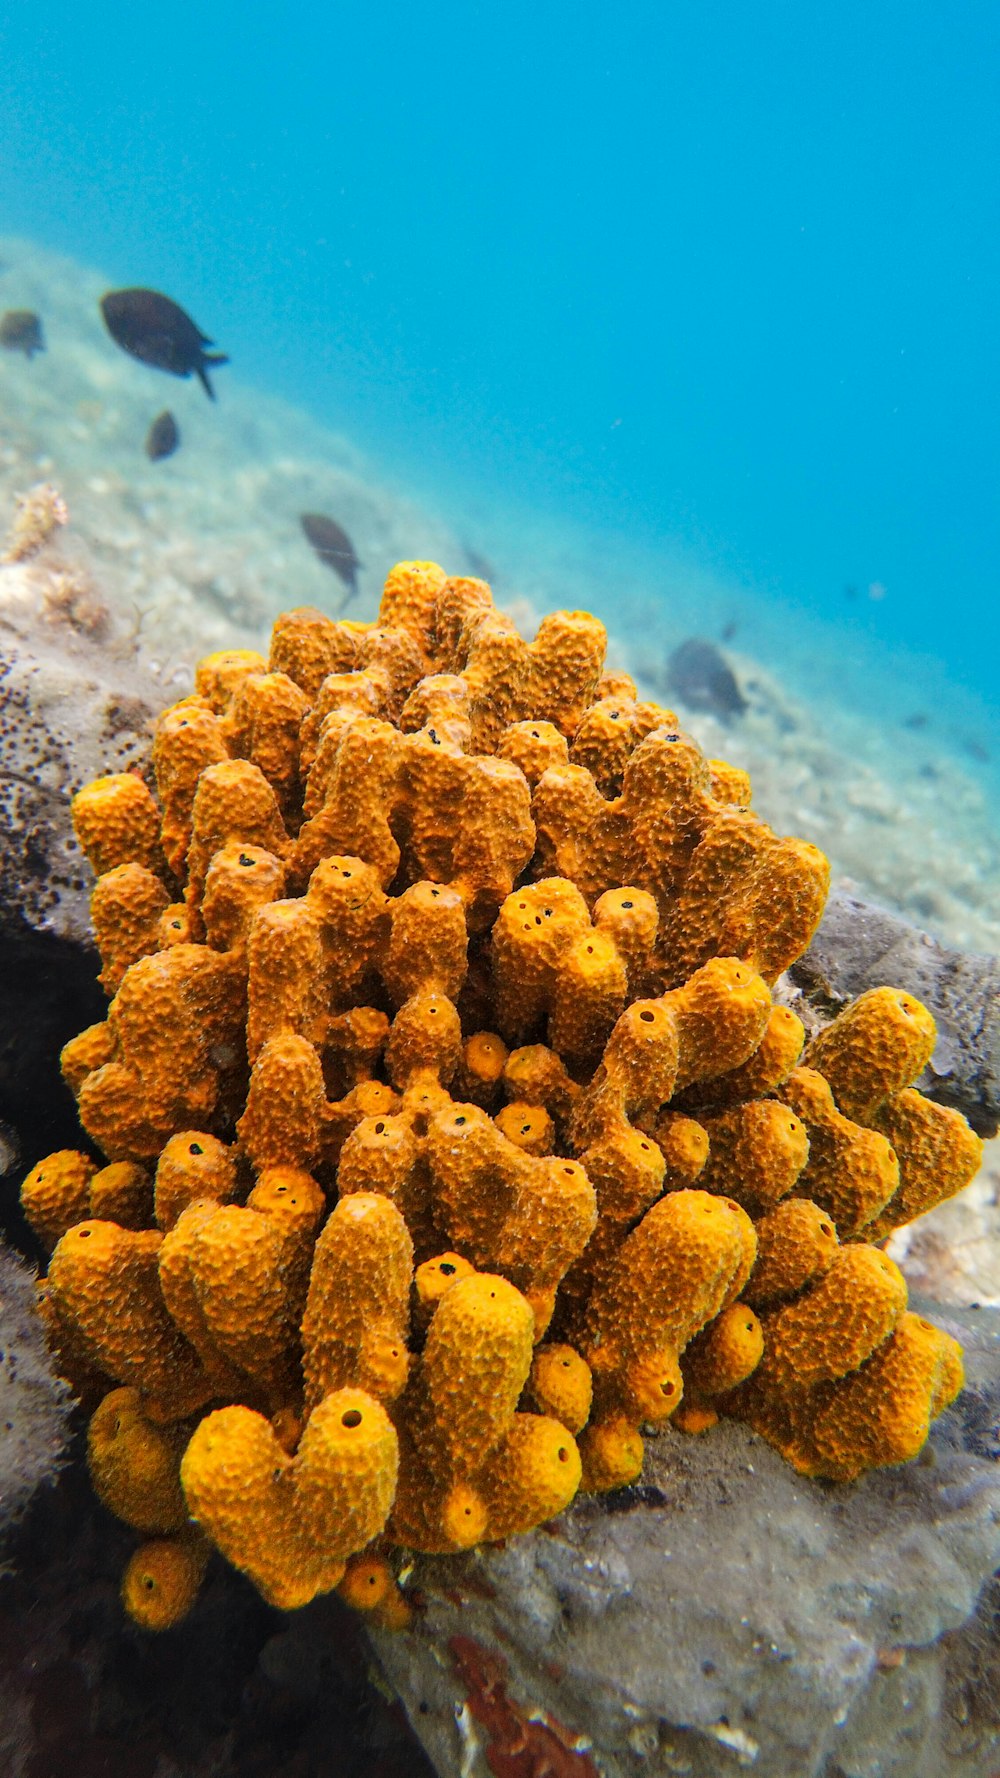 a group of small yellow corals on a coral reef